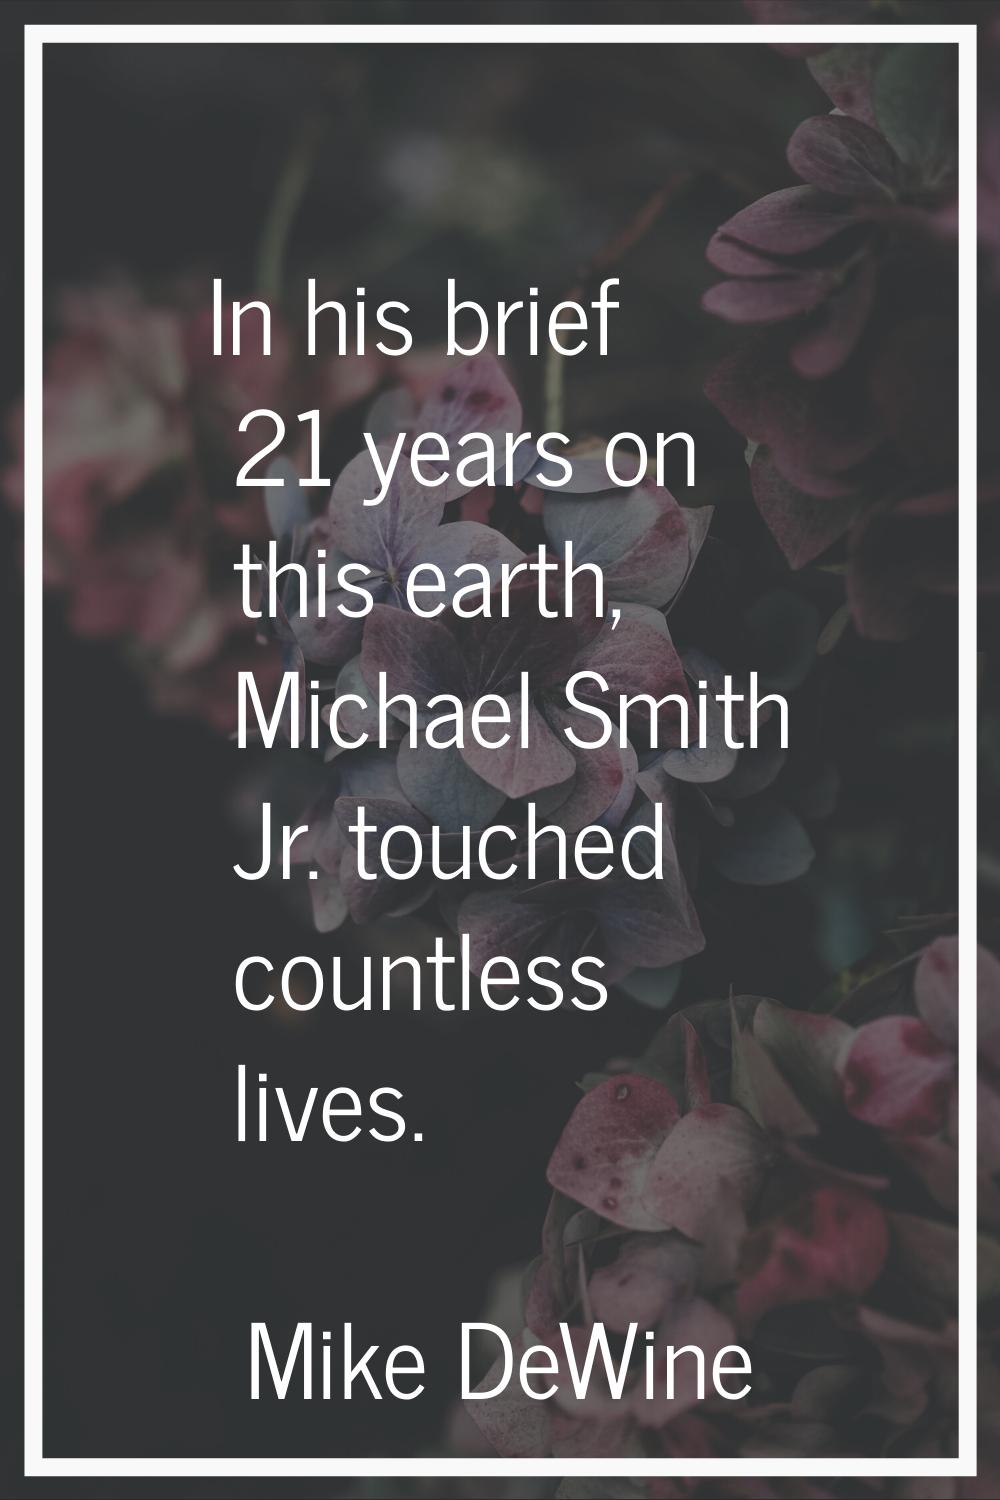 In his brief 21 years on this earth, Michael Smith Jr. touched countless lives.